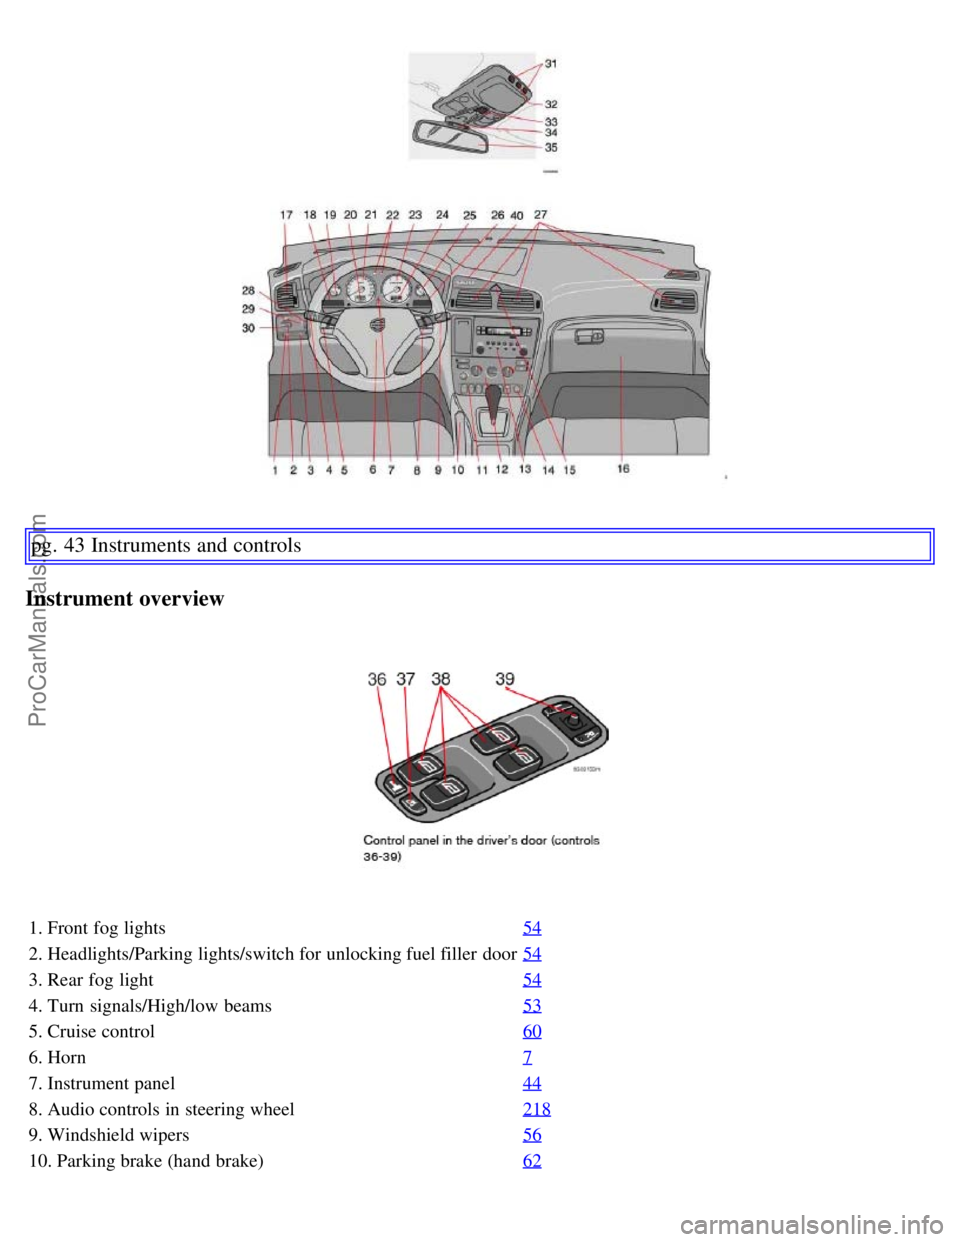 VOLVO S60 2007  Owners Manual pg. 43 Instruments and controls
Instrument overview
1. Front fog lights54
2. Headlights/Parking lights/switch for unlocking fuel filler  door54
3. Rear fog light54
4. Turn  signals/High/low beams53
5.